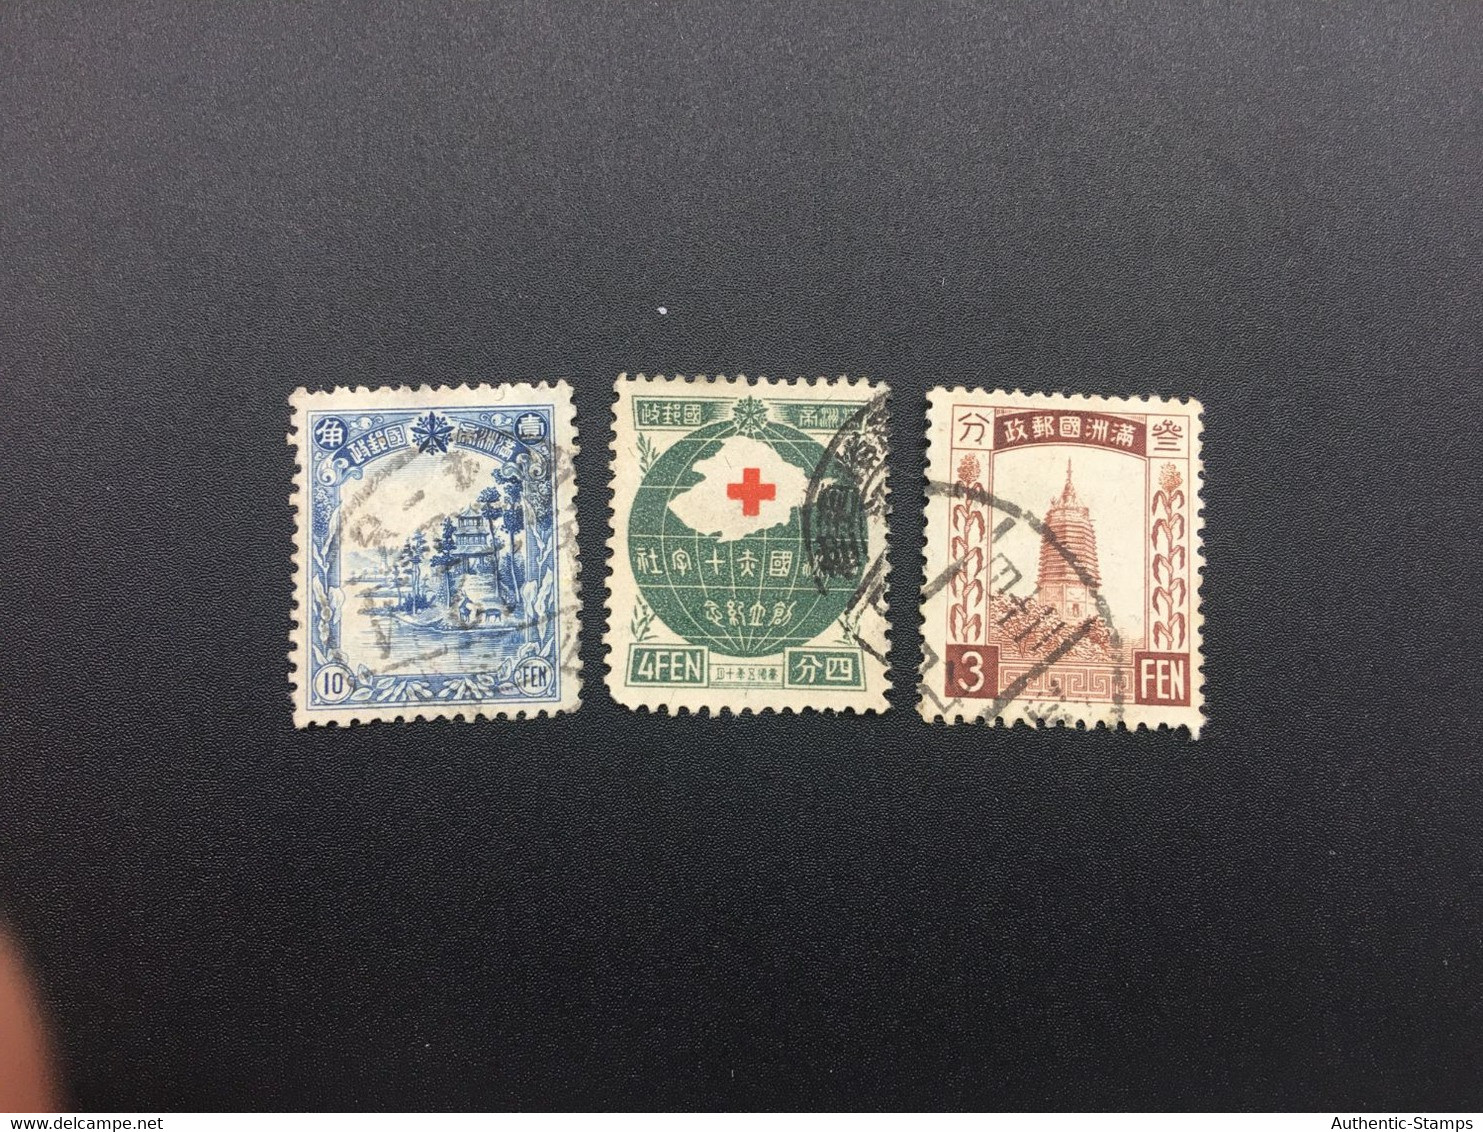 CHINA STAMP,  TIMBRO, STEMPEL,  CINA, CHINE, LIST 8271 - 1932-45 Mandchourie (Mandchoukouo)